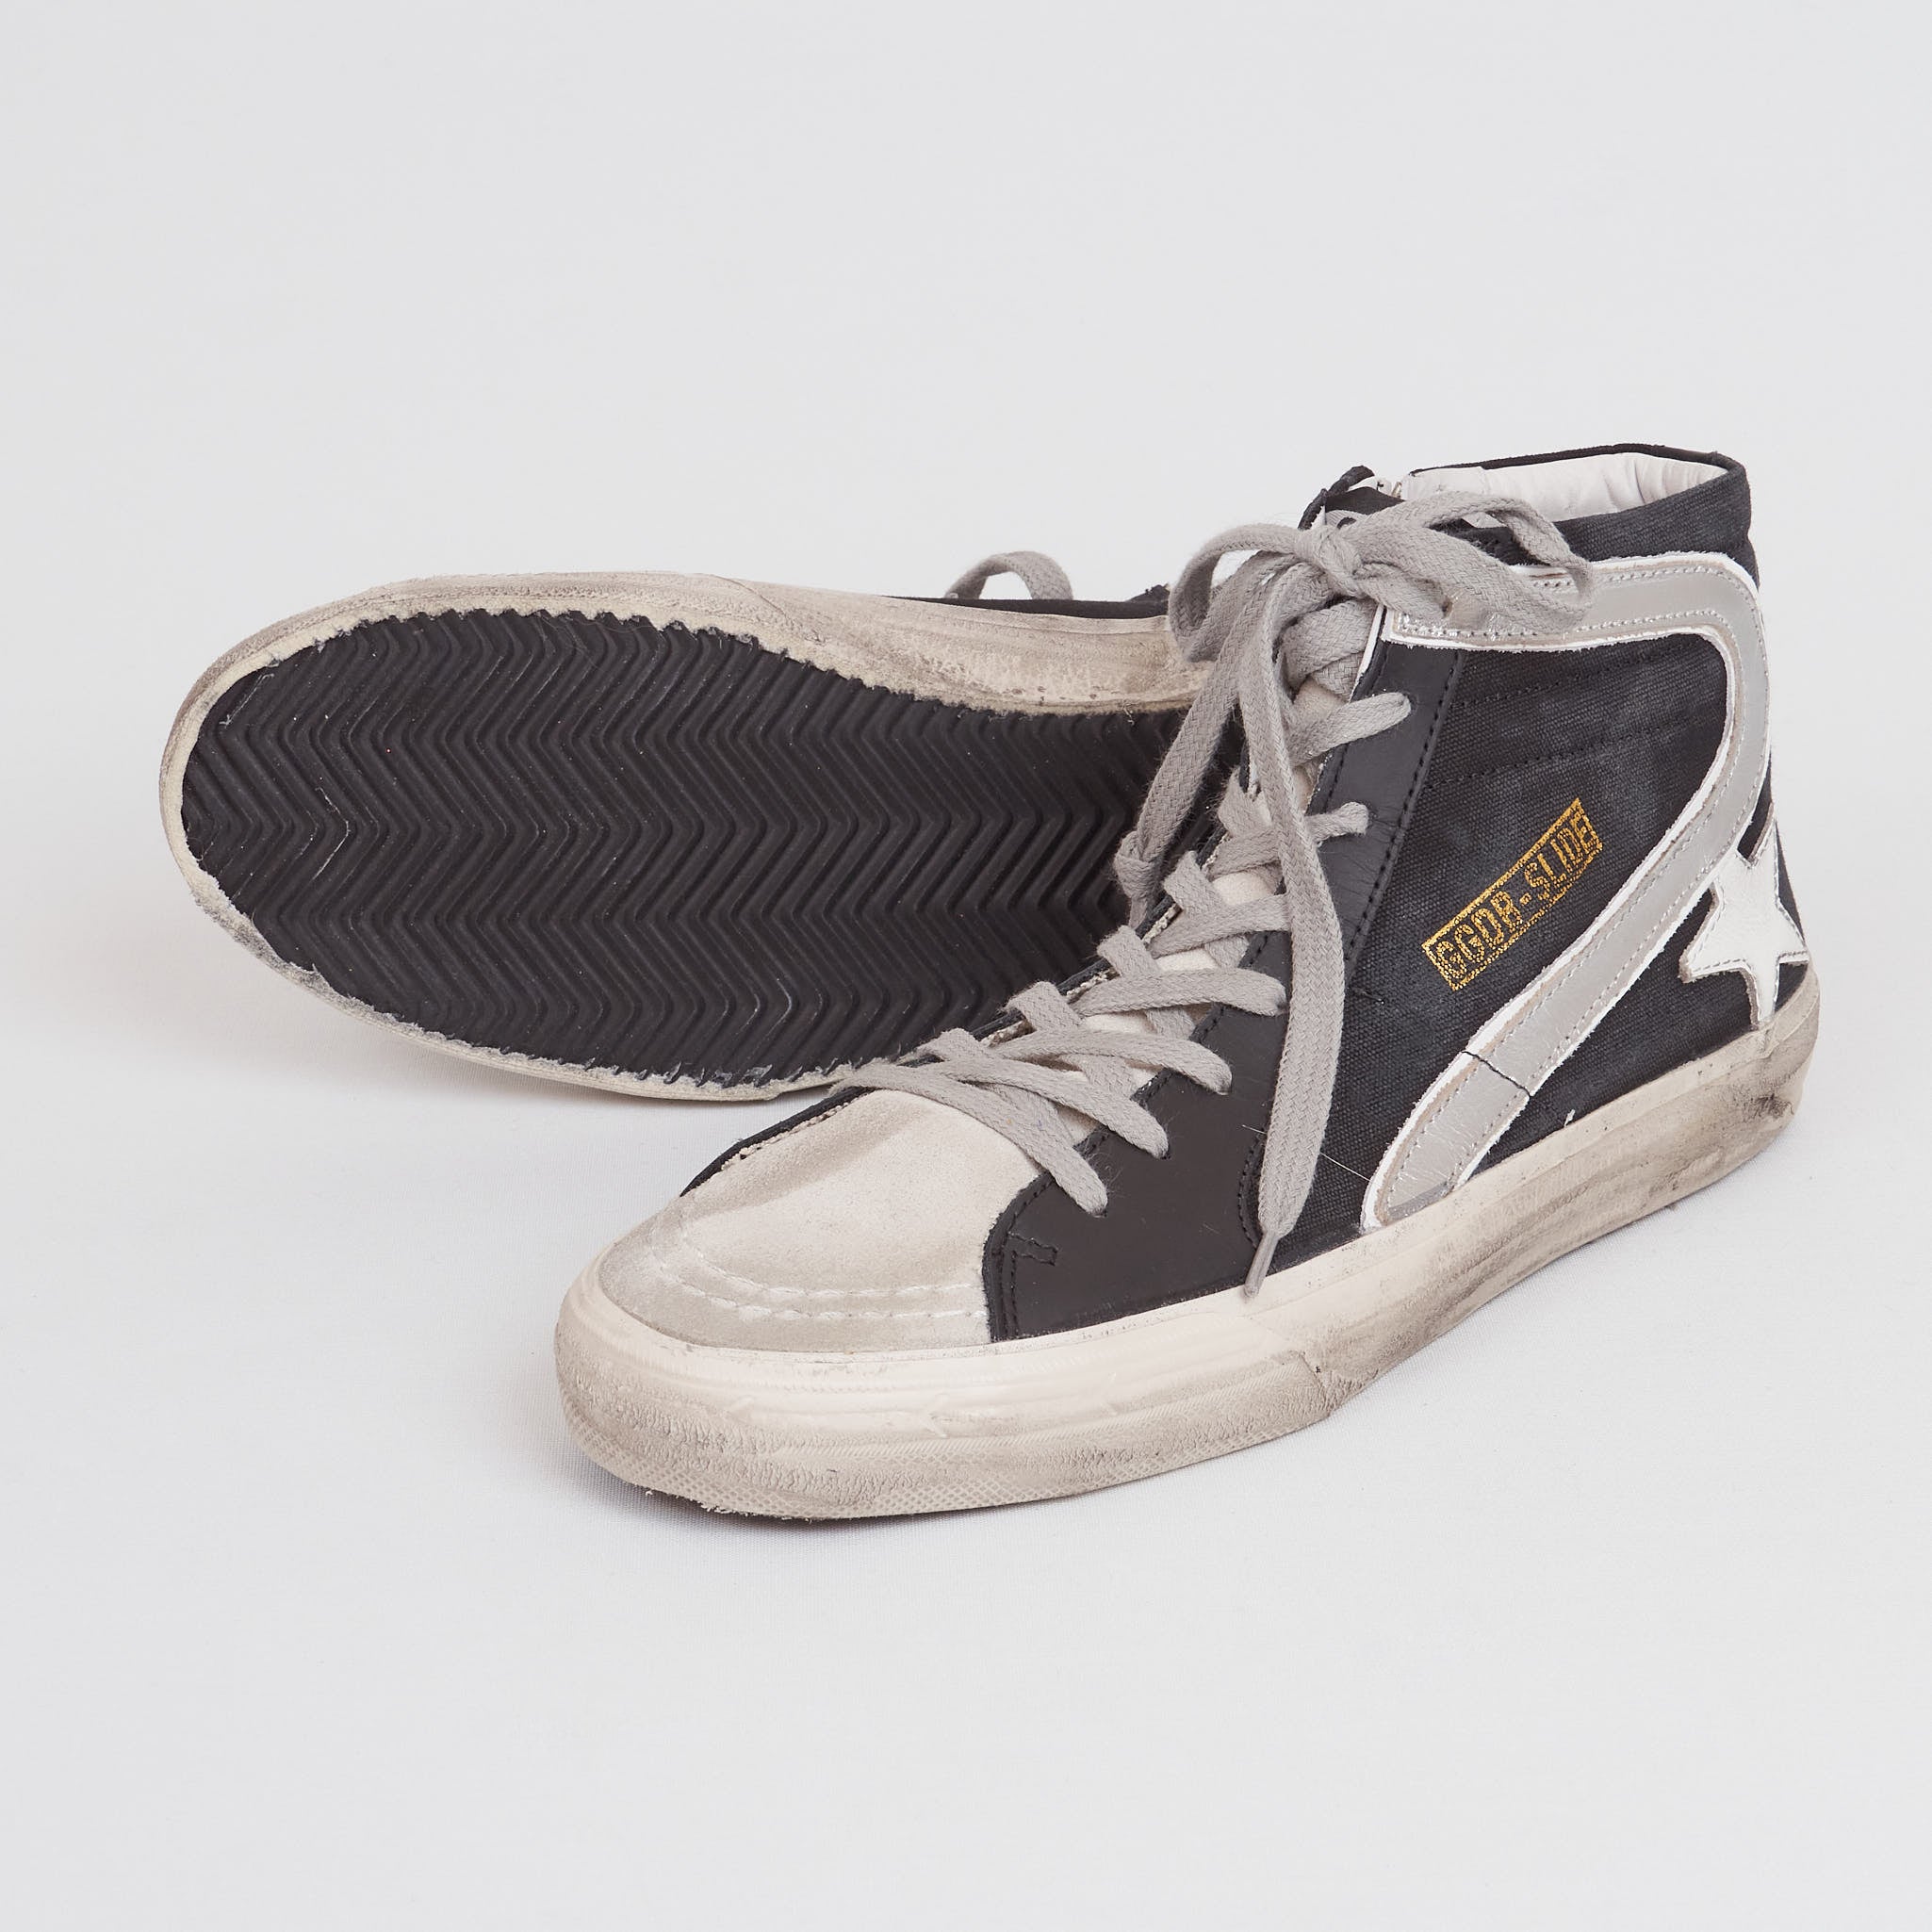 Slide sneakers in white leather with red leather star | Golden Goose